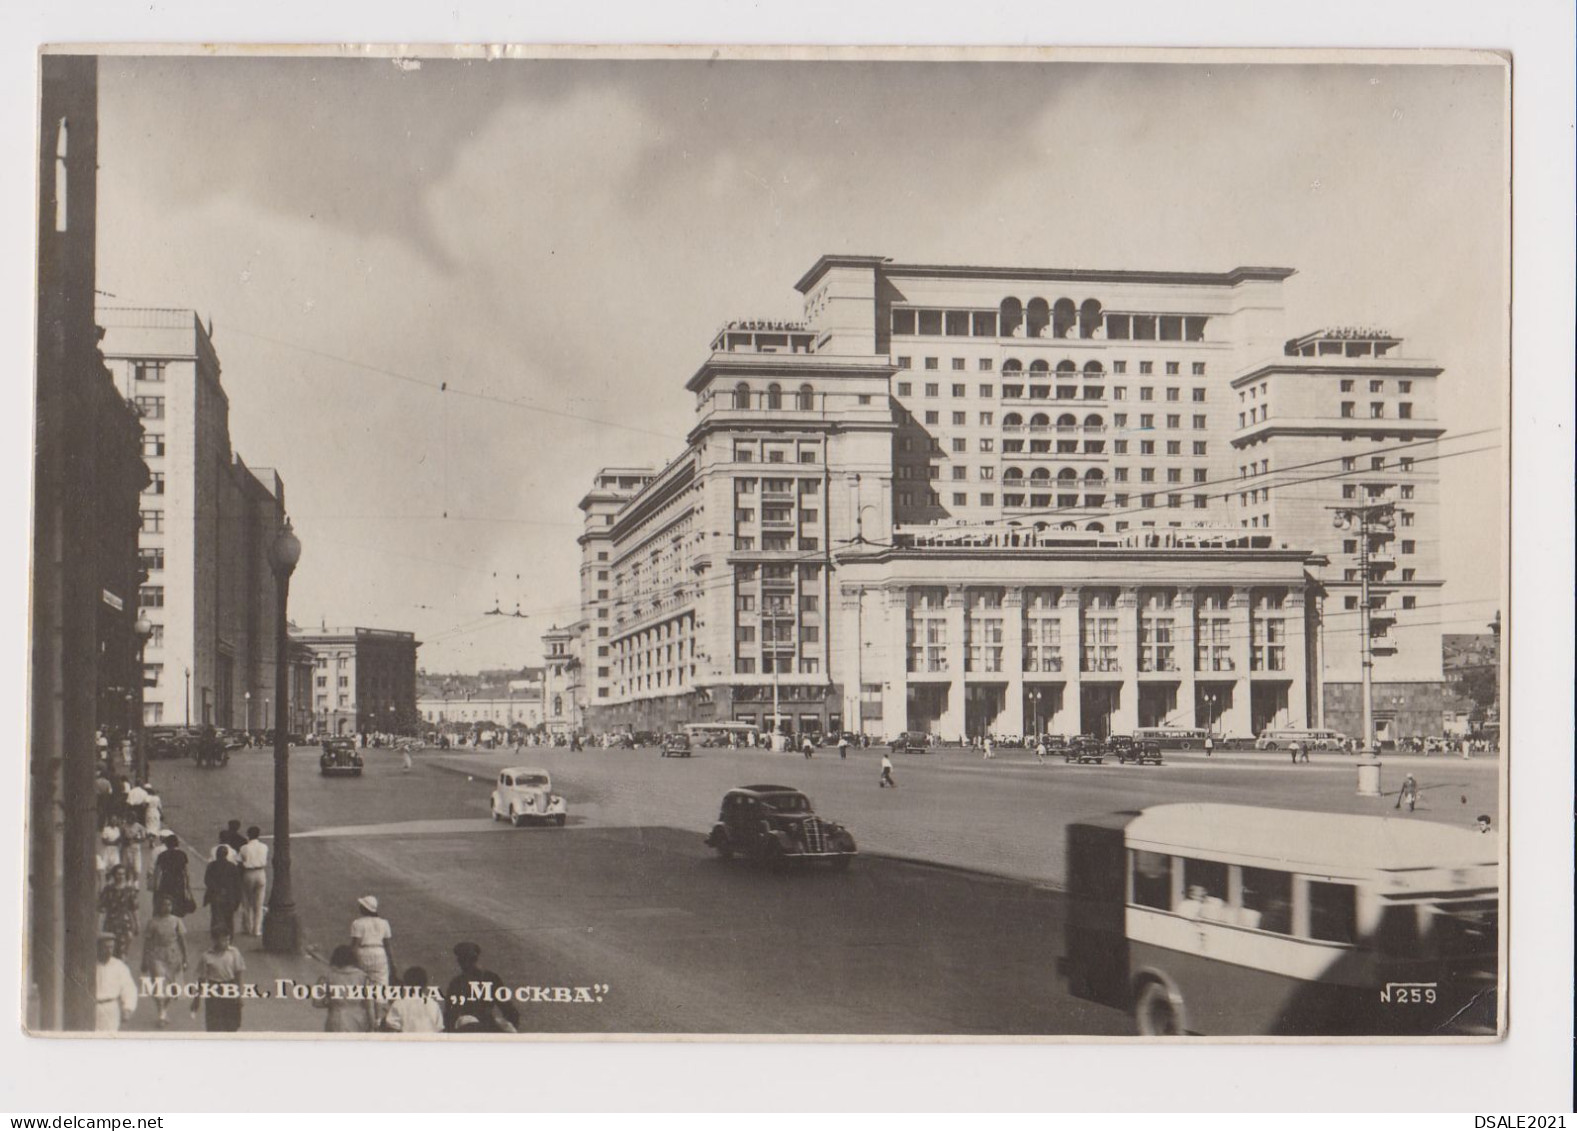 Soviet Union Russia USSR Moscow Hotel "MOSCOW", Street, Old Cars, View 1950s Photo Postcard RPPc AK (36954) - Rusland